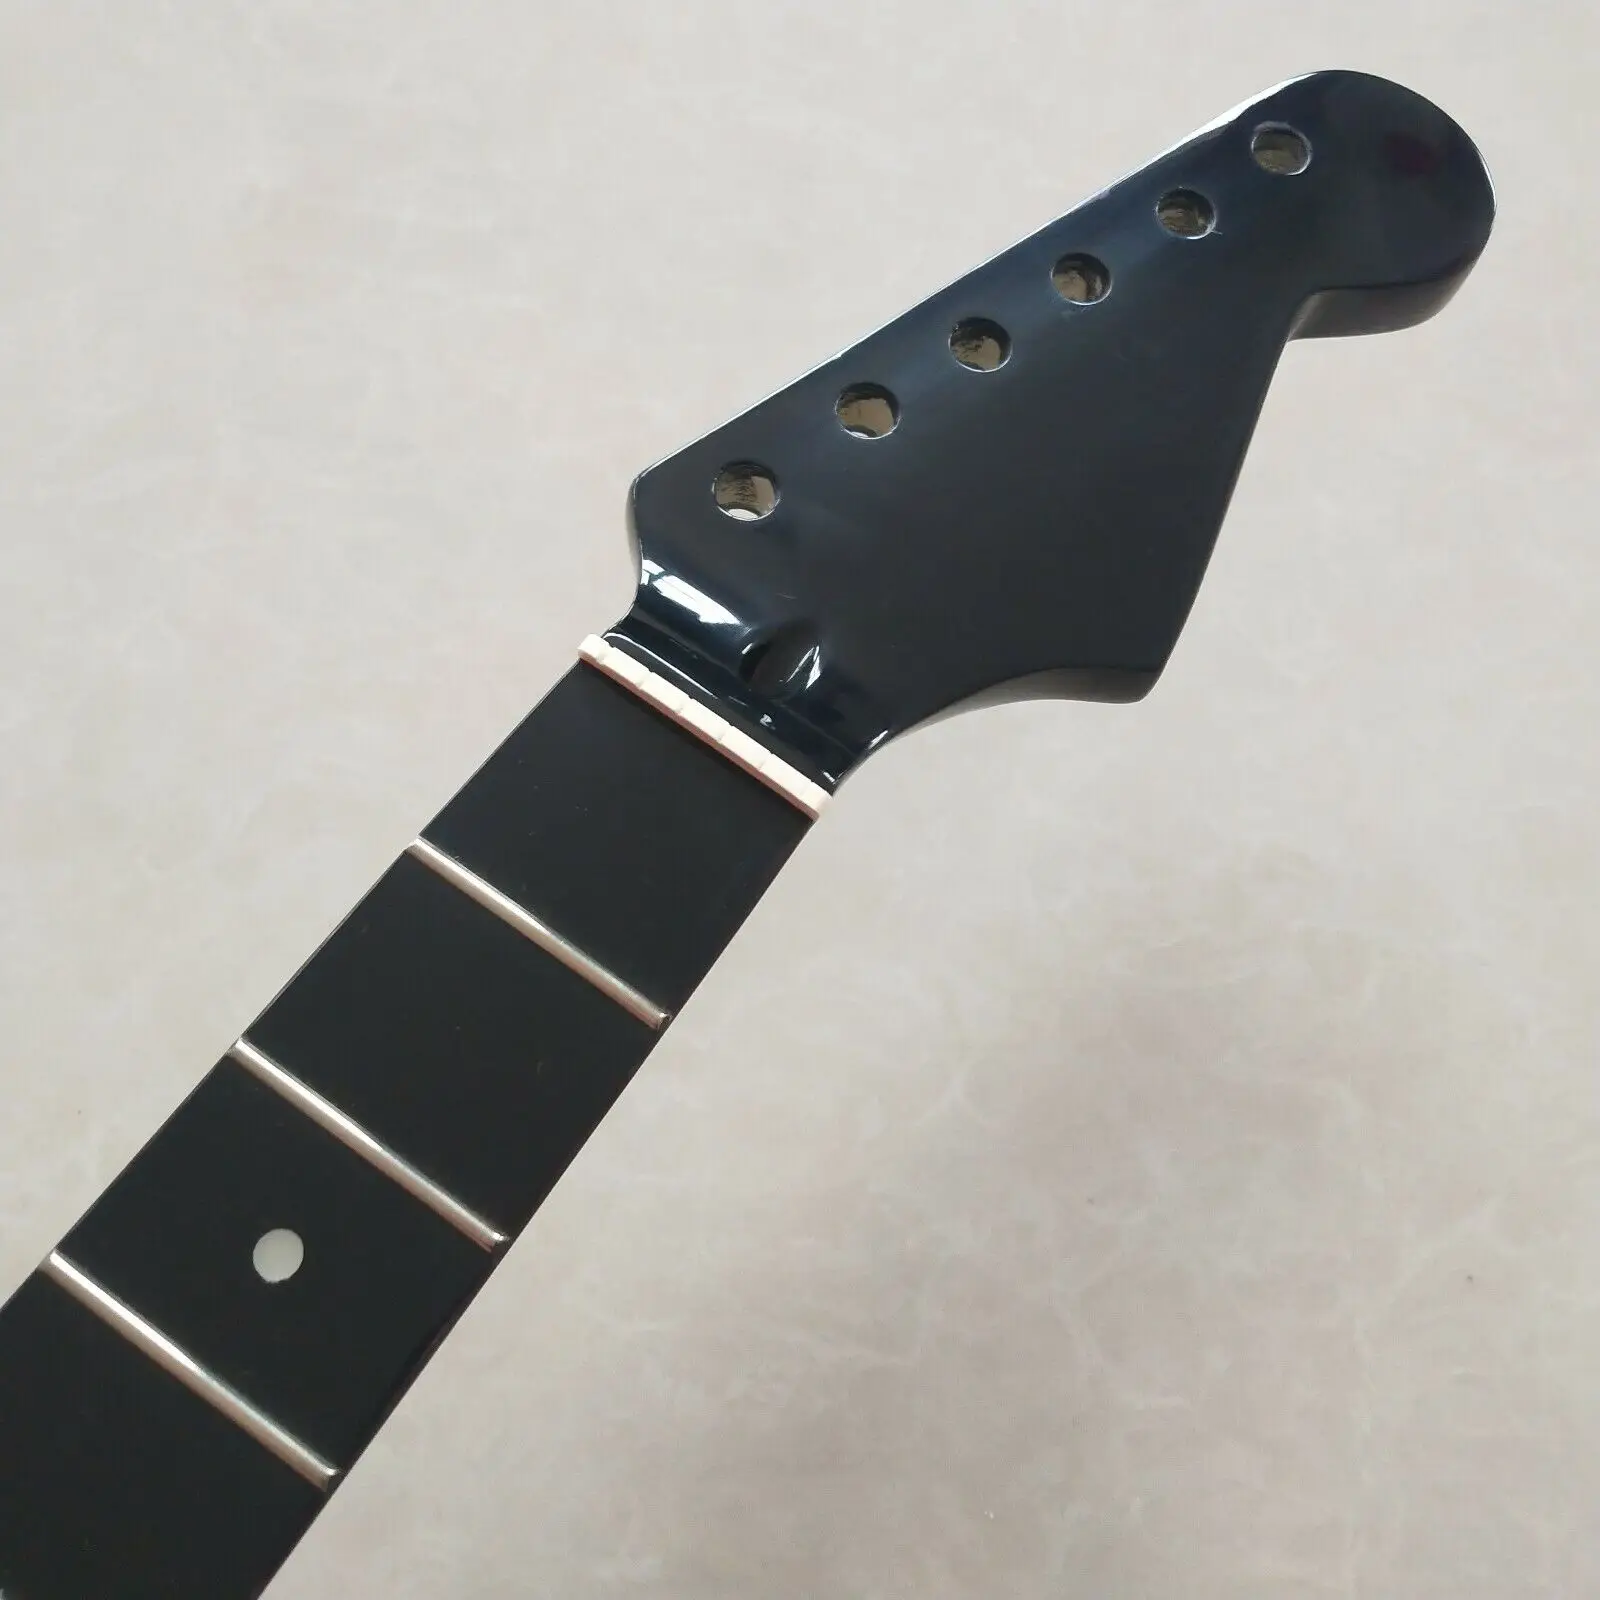 Black Maple Guitar neck 22 fret 25.5inch Maple Fretboard dots Inlay Gloss parts enlarge